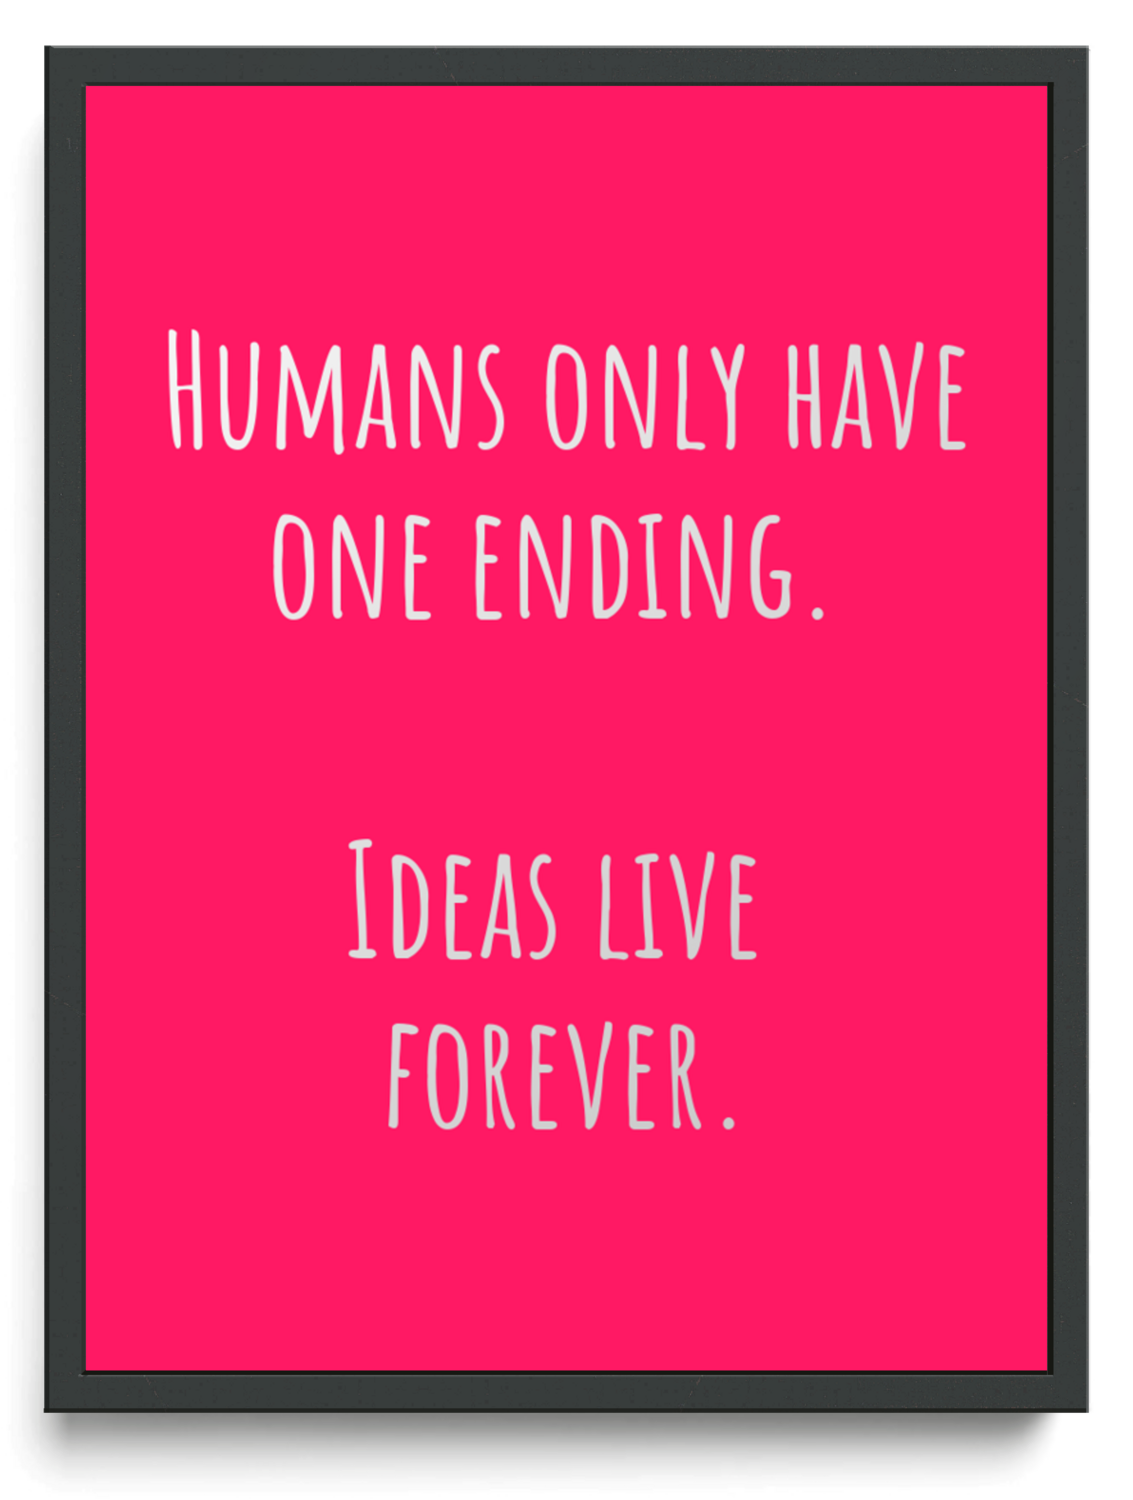 Humans only have one ending. Ideas live forever. framed typographic print